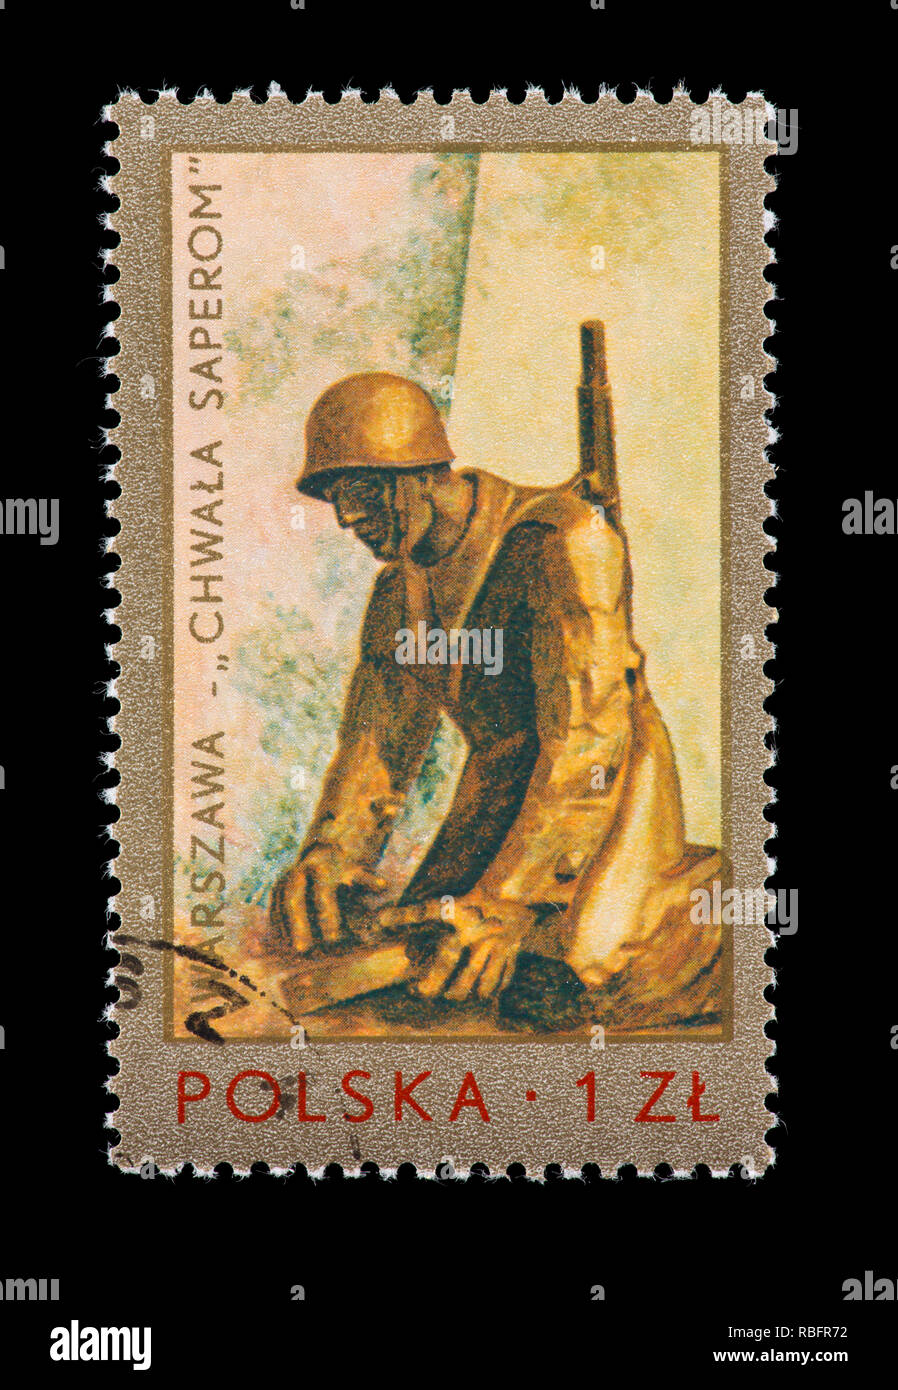 Postage stamp from Poland depicting the Stanislaw Kulow sculpture Sappers' Monument in Warsaw, 30'th anniversary of the end of World War 2. Stock Photo